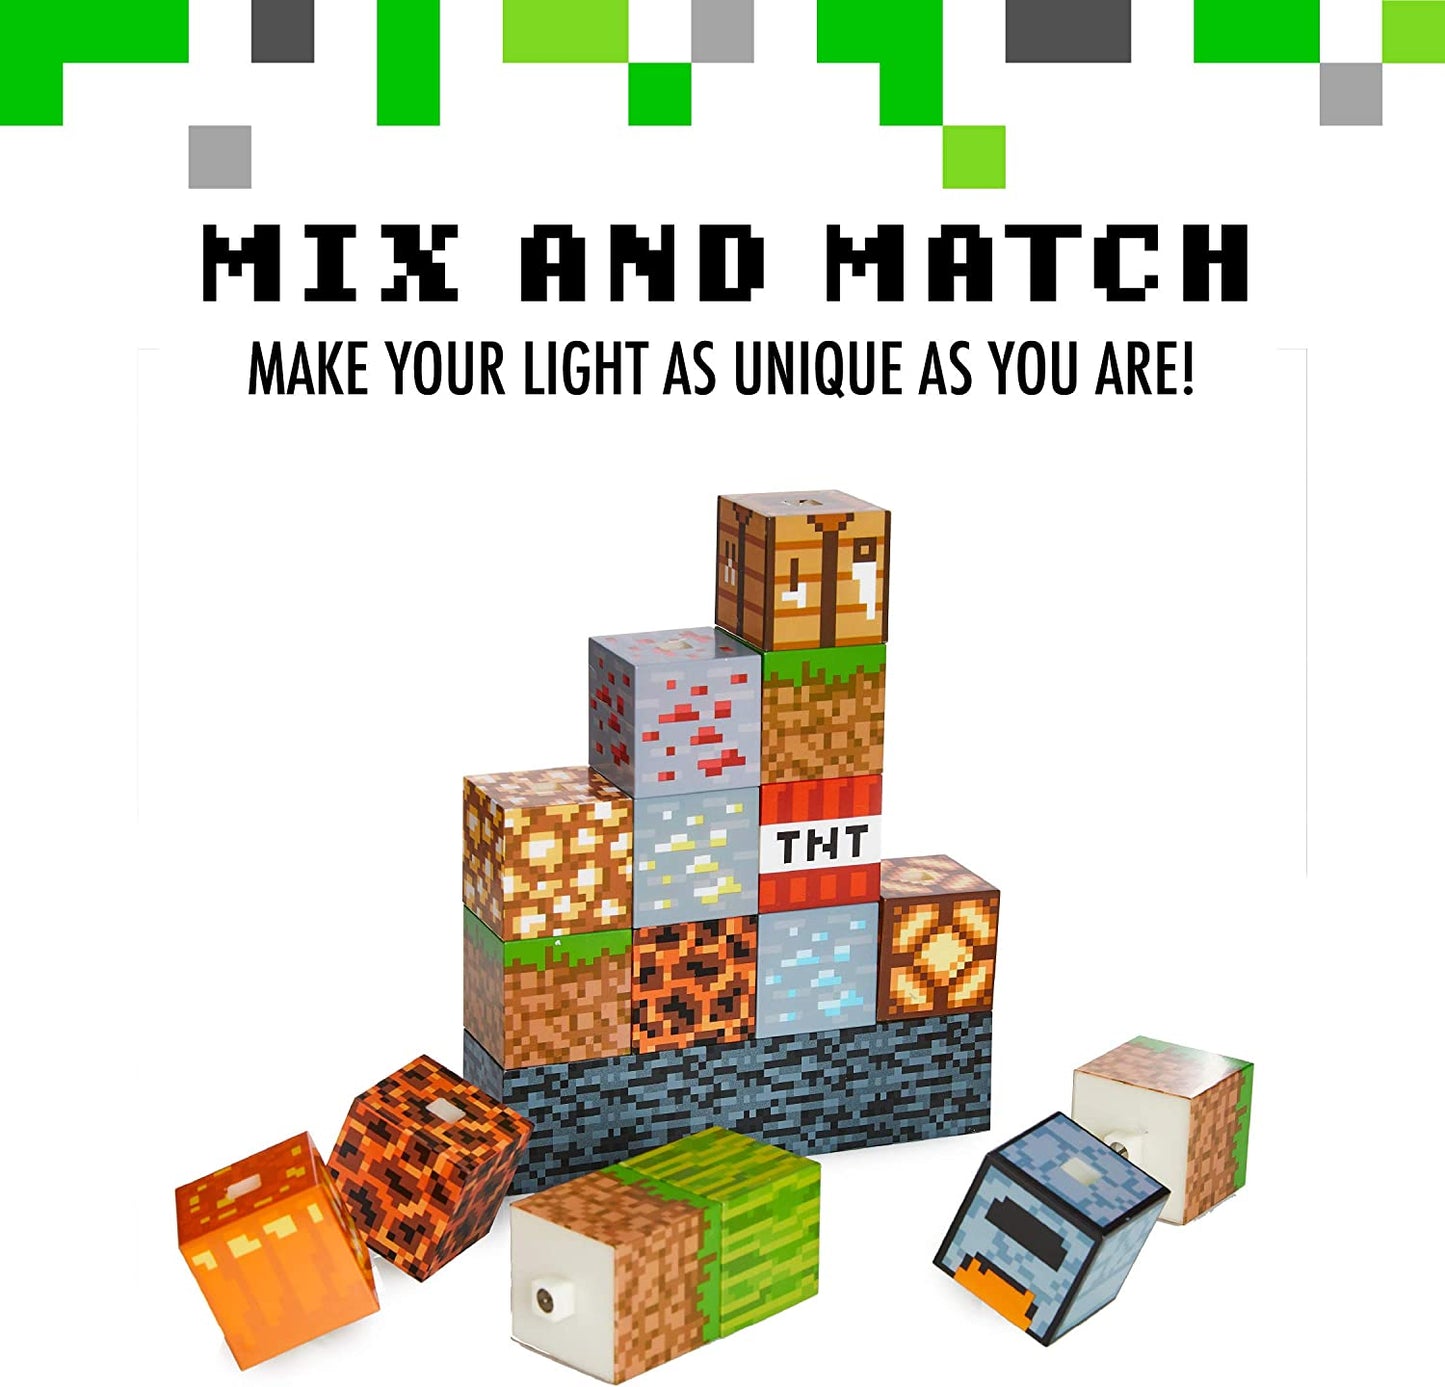 A Minecraft block building light with some loose blocks in the foreground. The text reads, 'Mix and match. Make your light as unique as you are.'